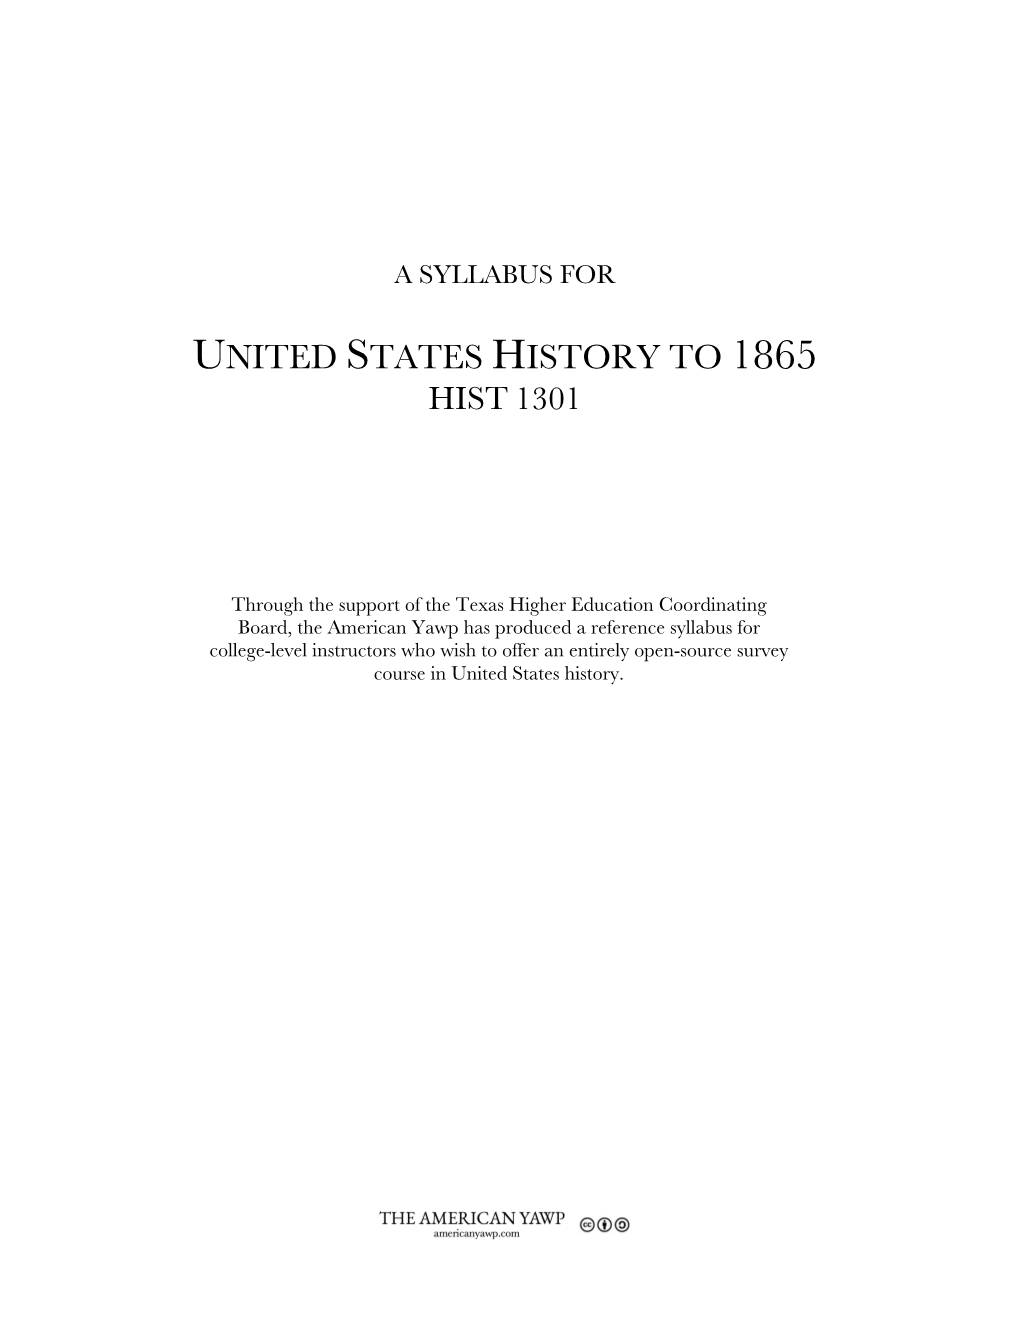 United States History to 1865 Hist 1301